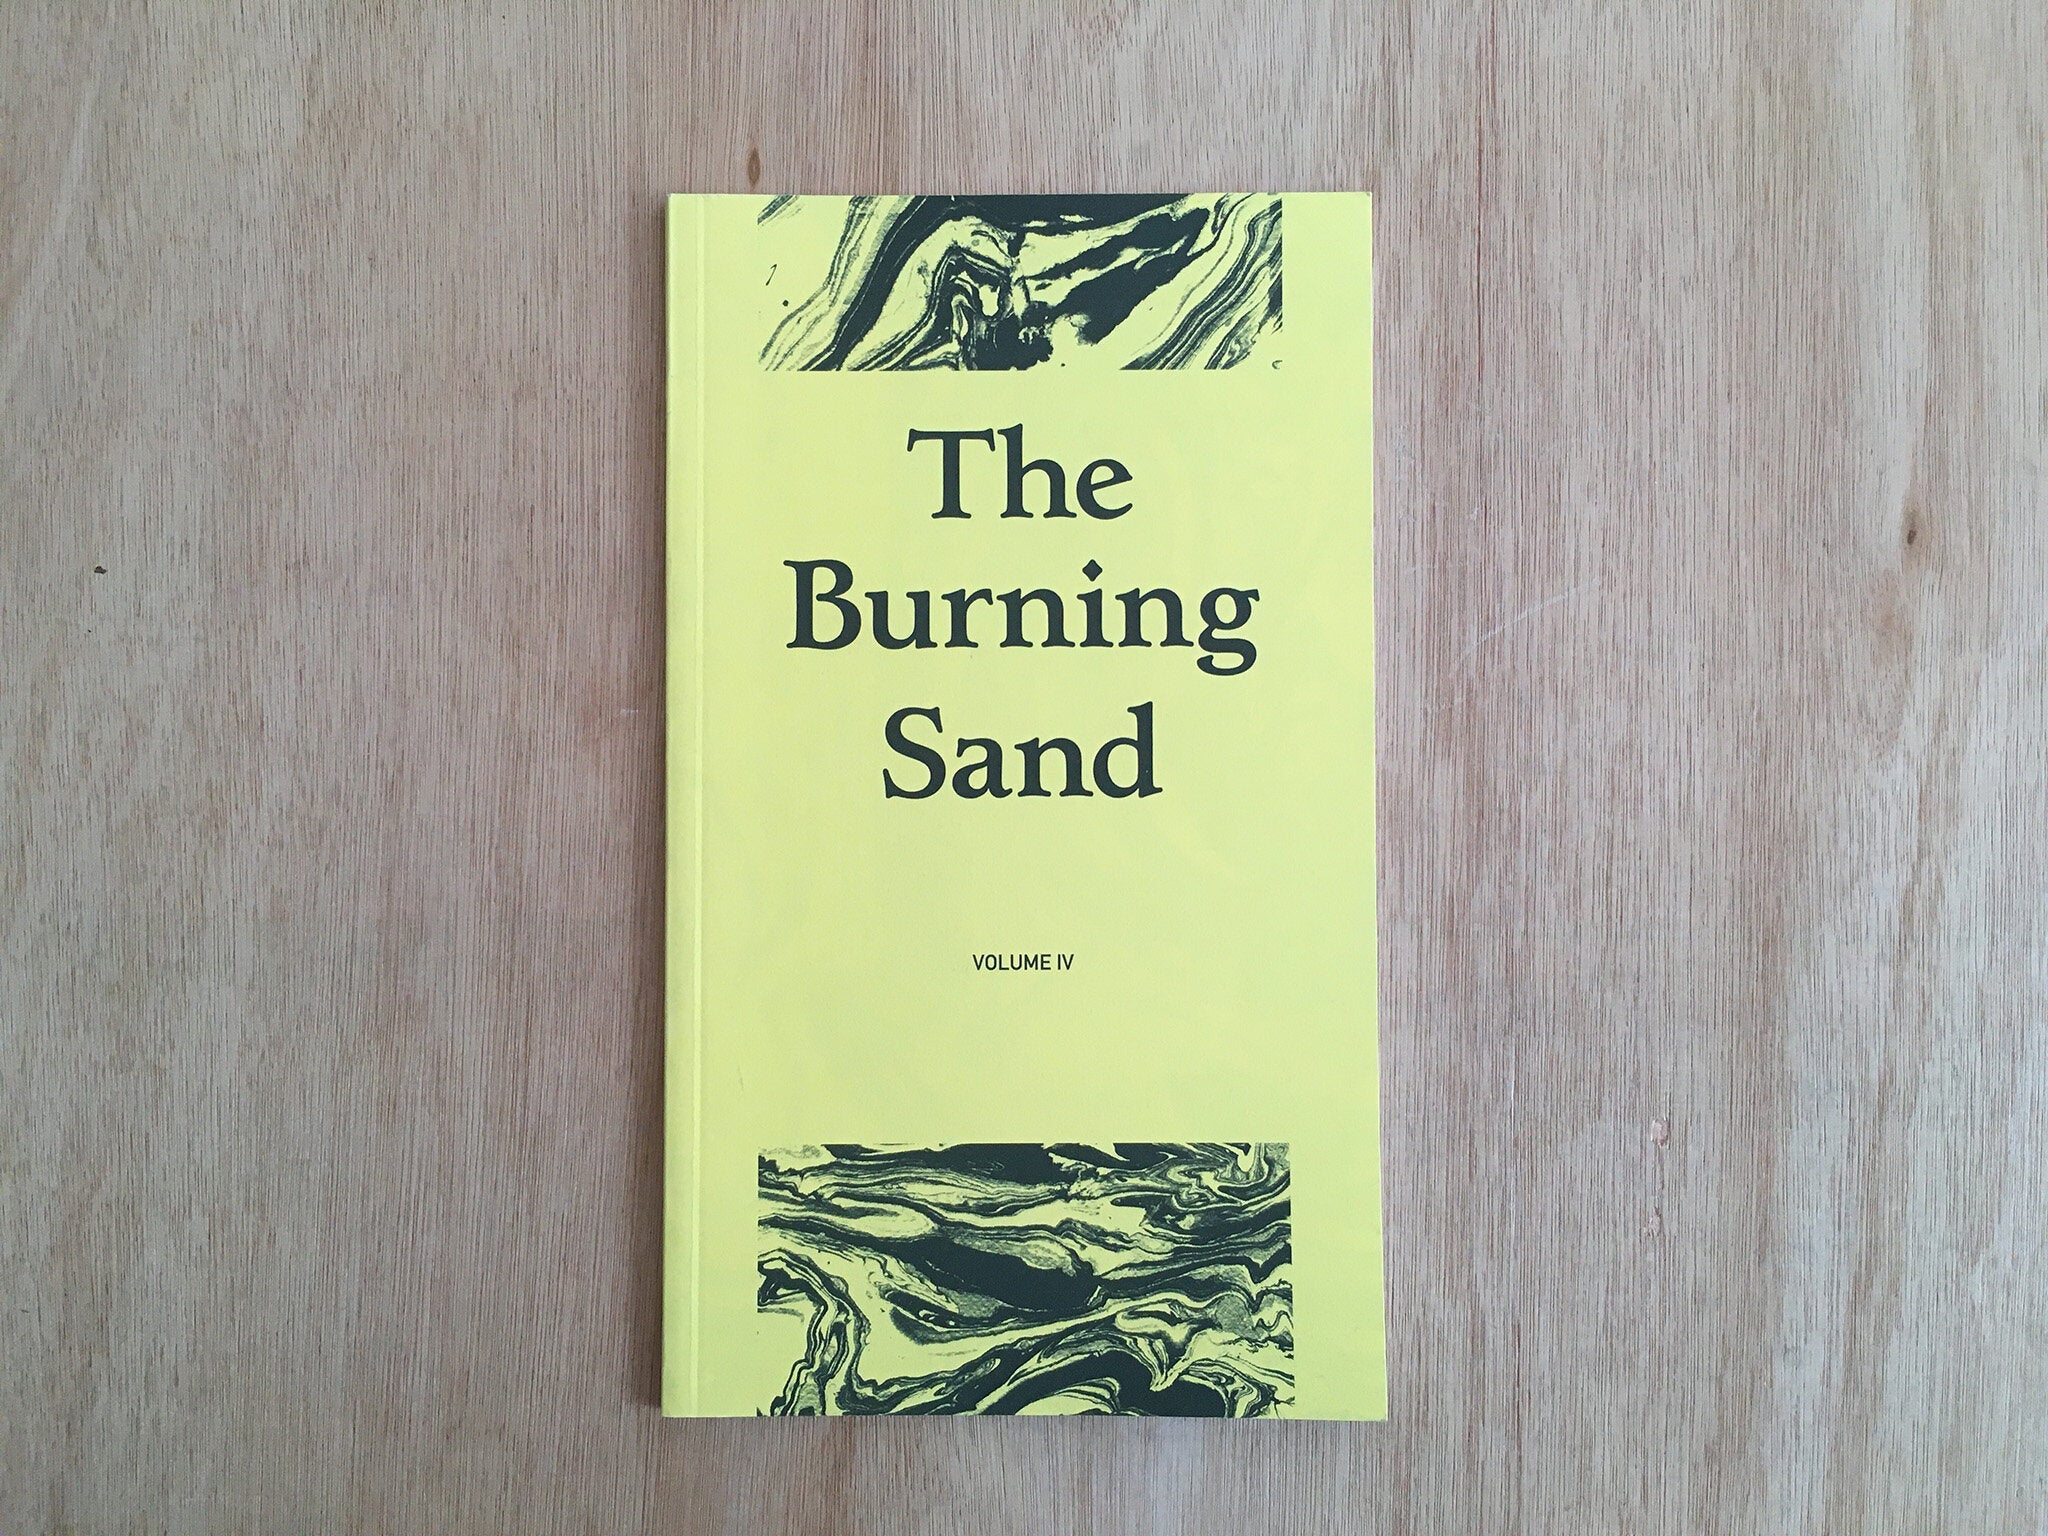 THE BURNING SAND VOLUME IV by Various Artists